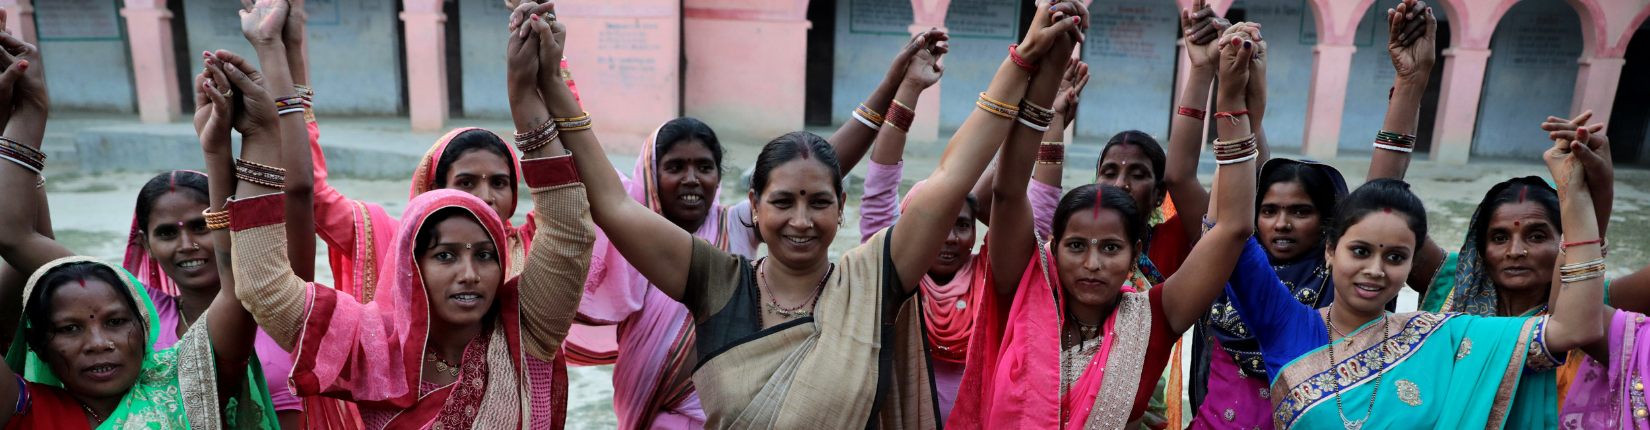 A group of women raise their hands in India